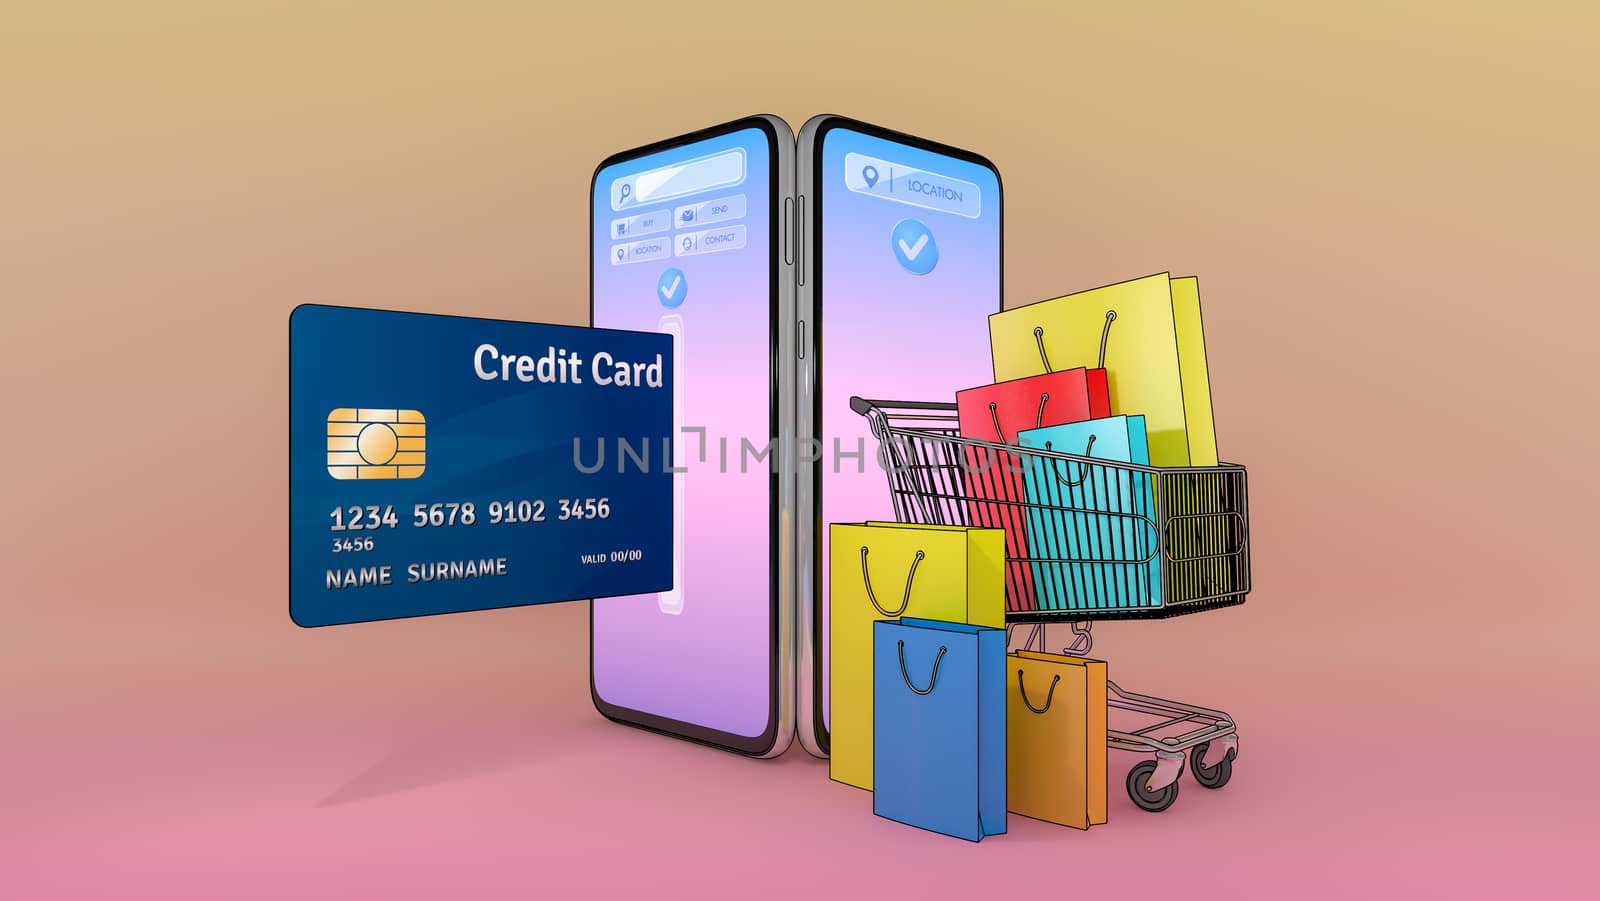 Many Shopping bag and price tag and credit card in a shopping cart appeared from smartphones screen., shopping online or shopaholic concept.,3d illustration with object clipping path.